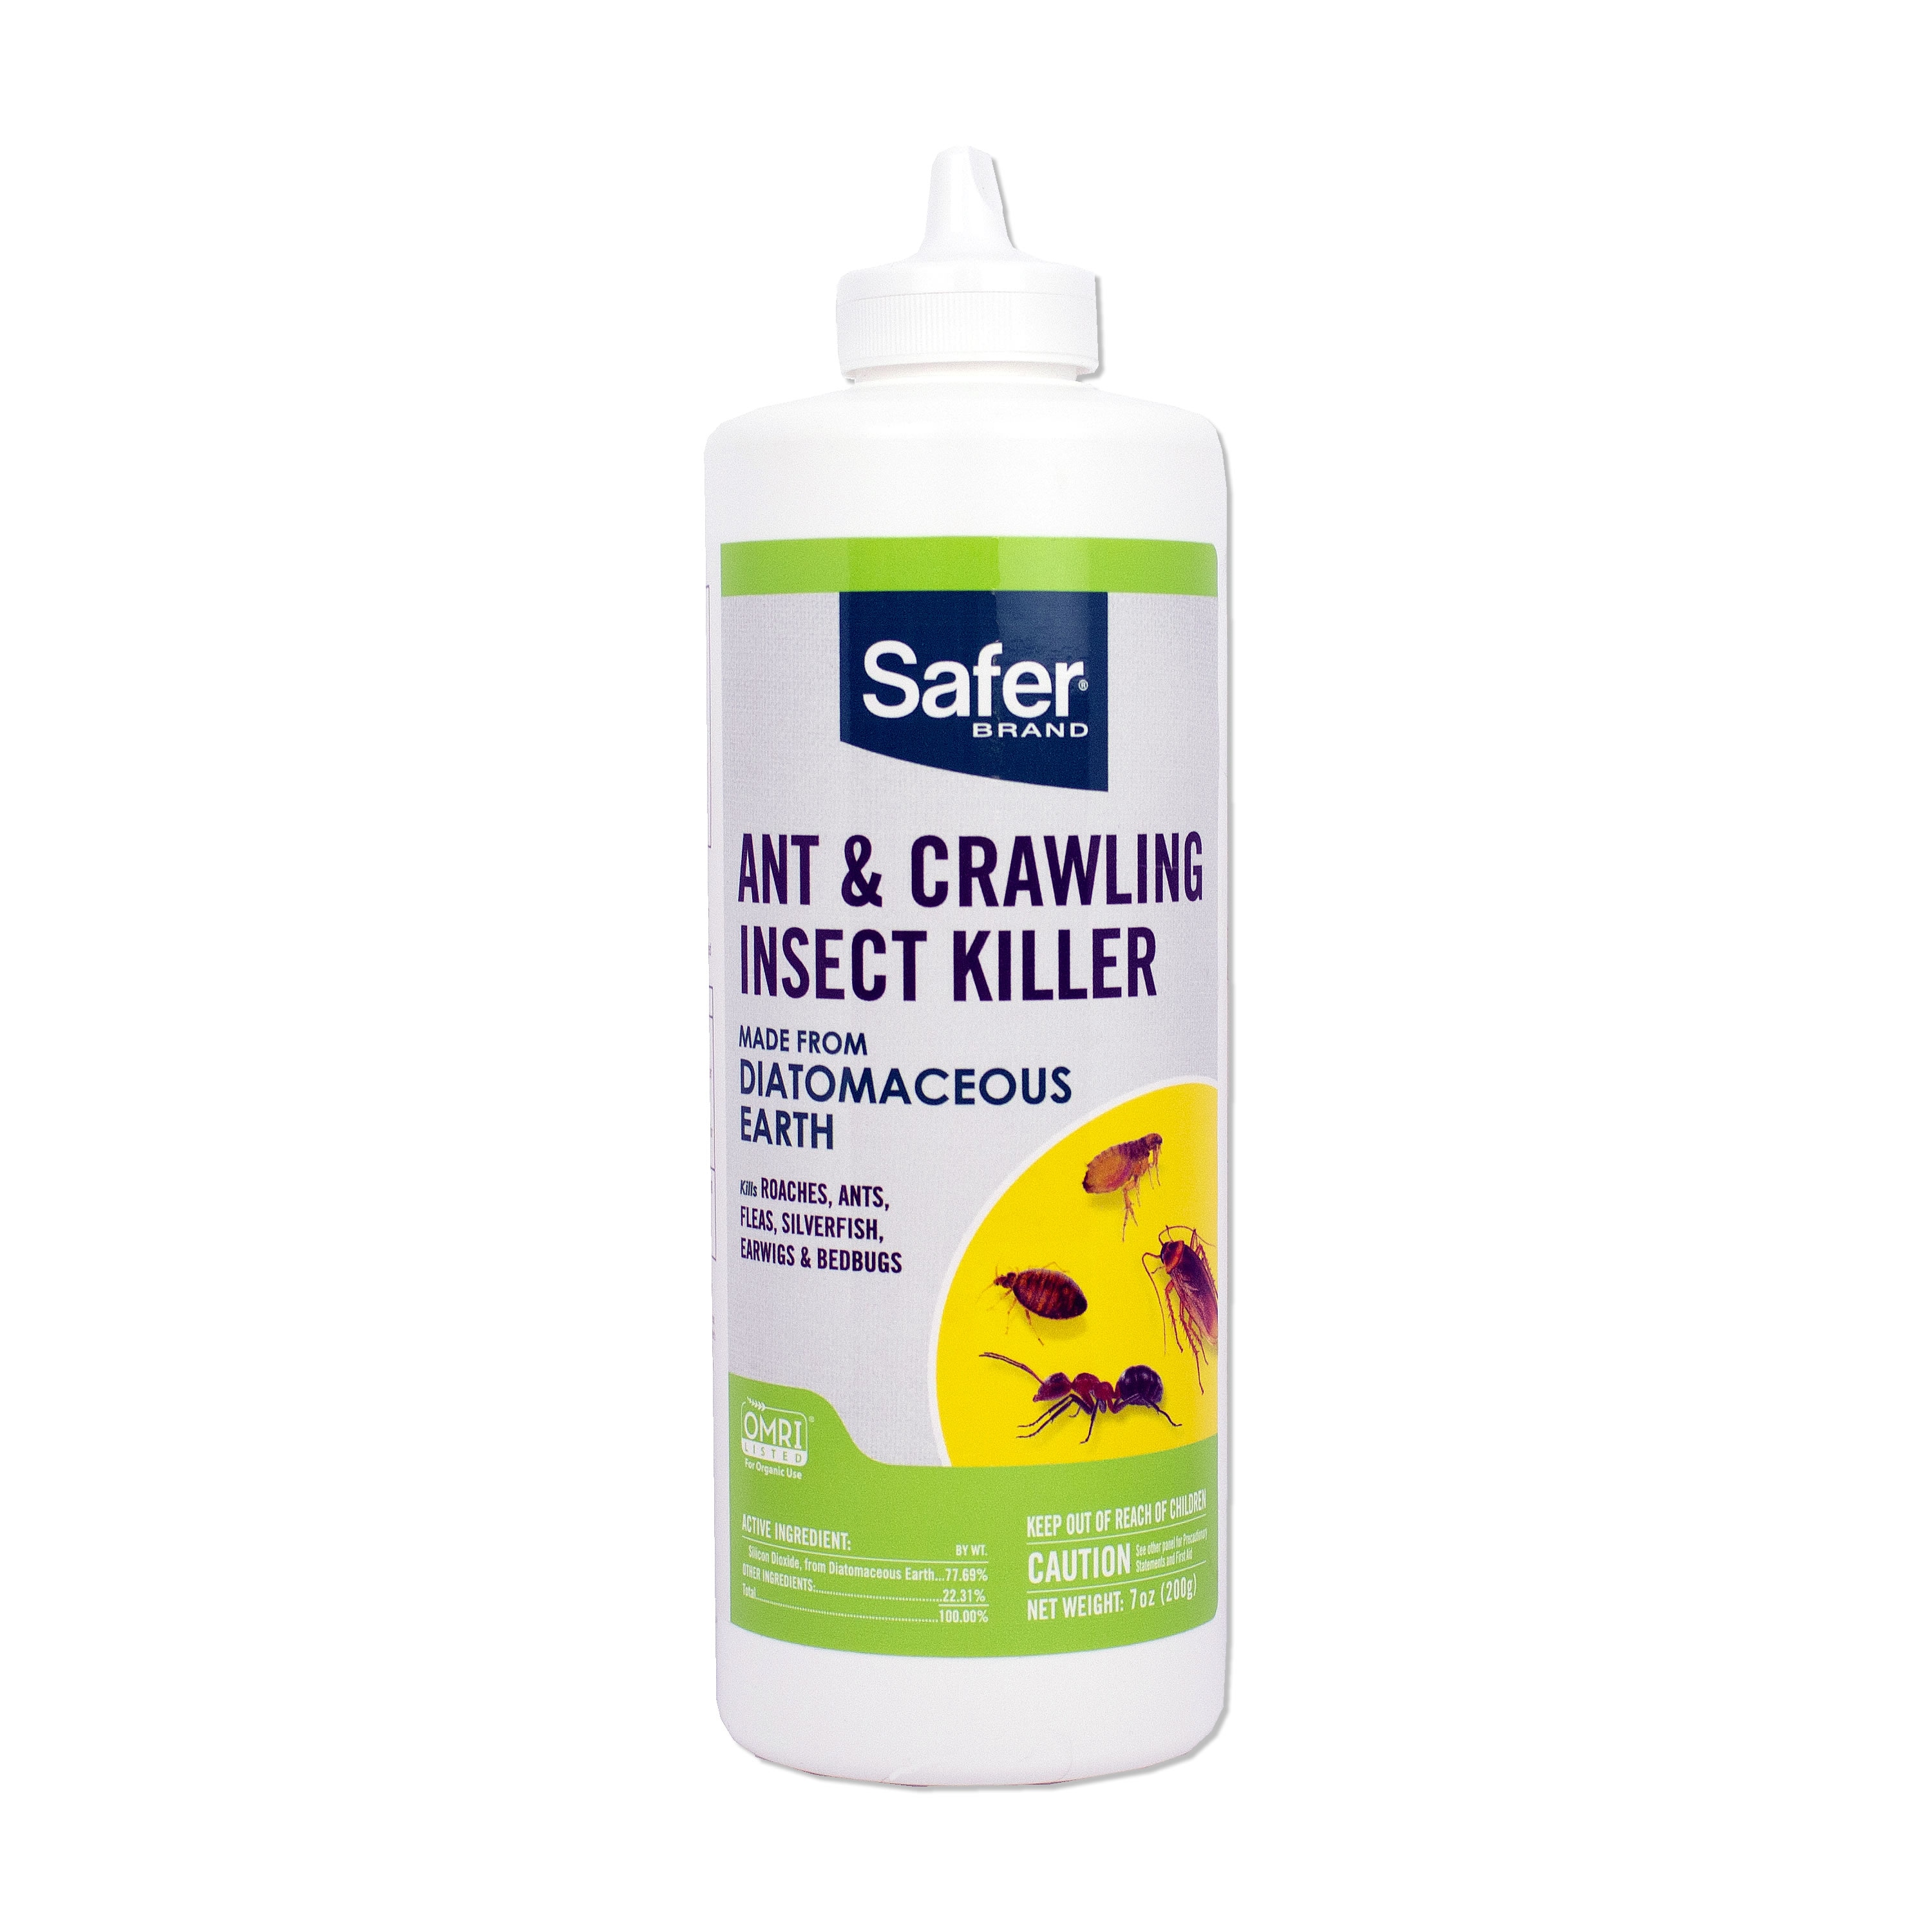 Safer 4 lb Diatomaceous Earth Ant & Crawling Insect Killer